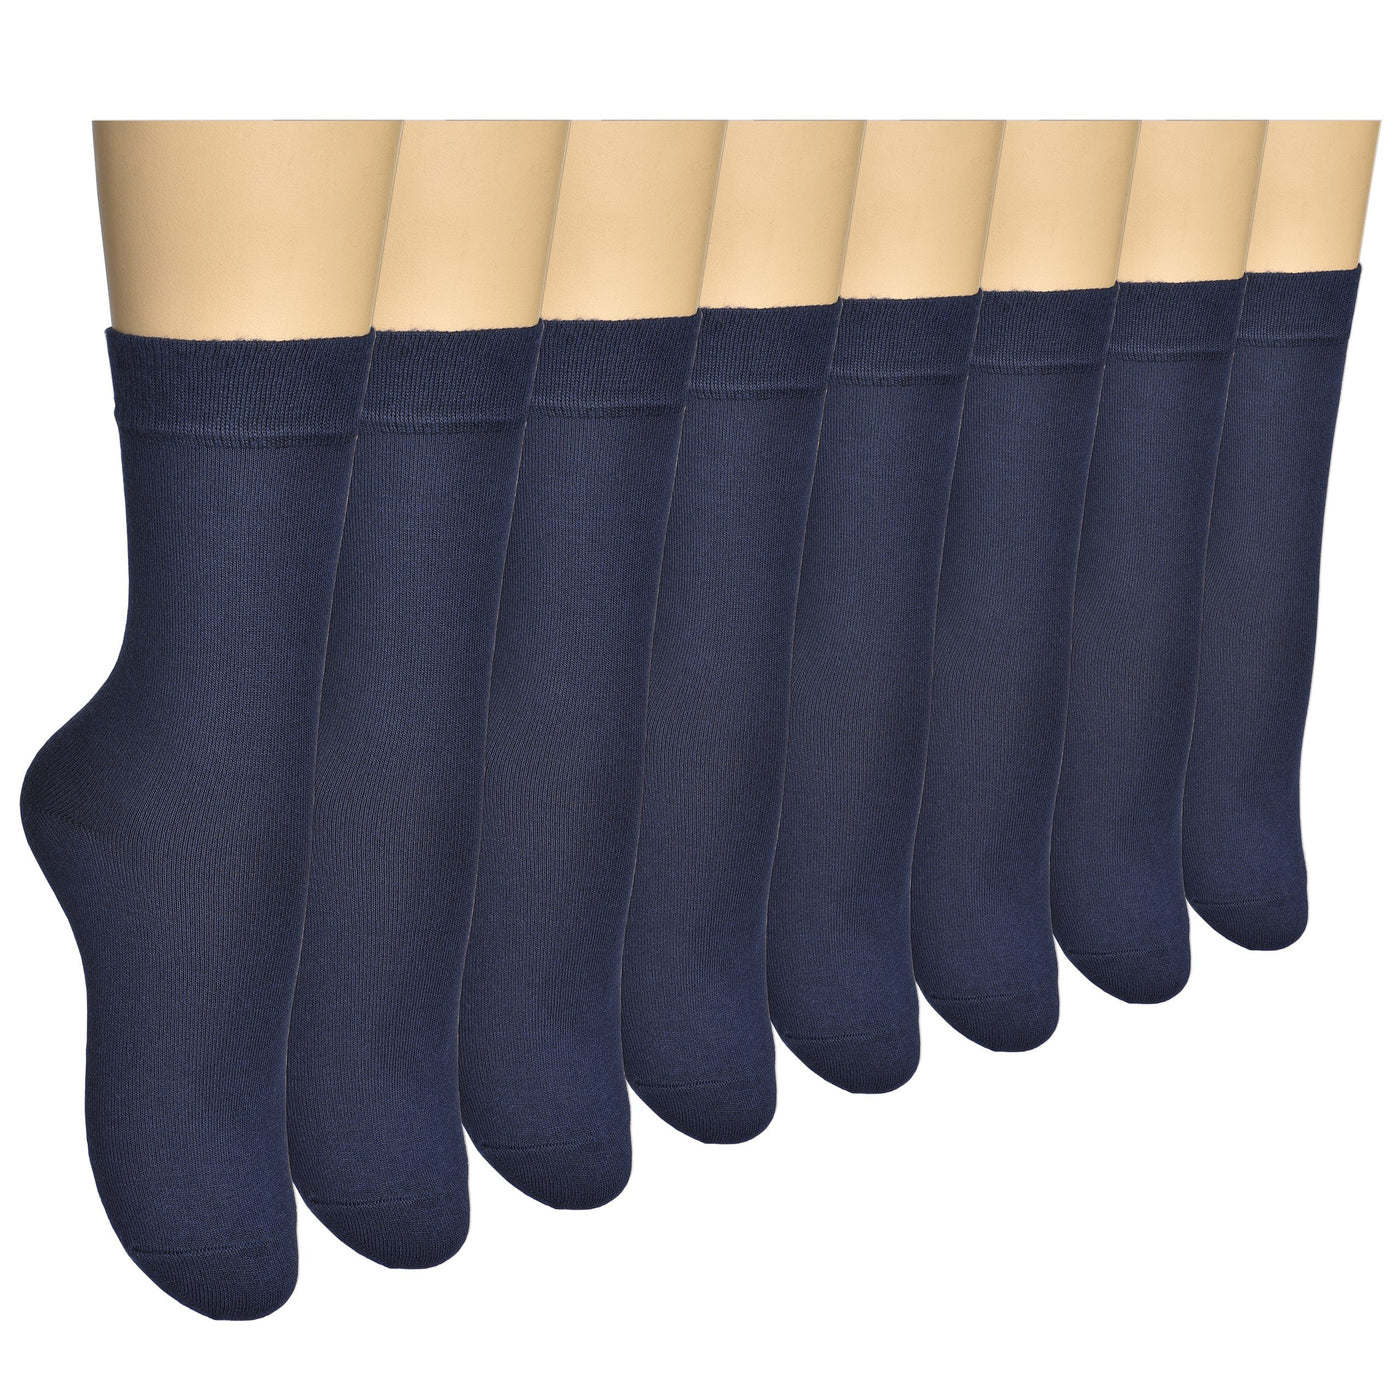 Elyfer Womens Thin Bamboo Dress Socks Seamless Toe - Above Ankle - Soft - Durable - Breathable 8 Pairs #color_navy